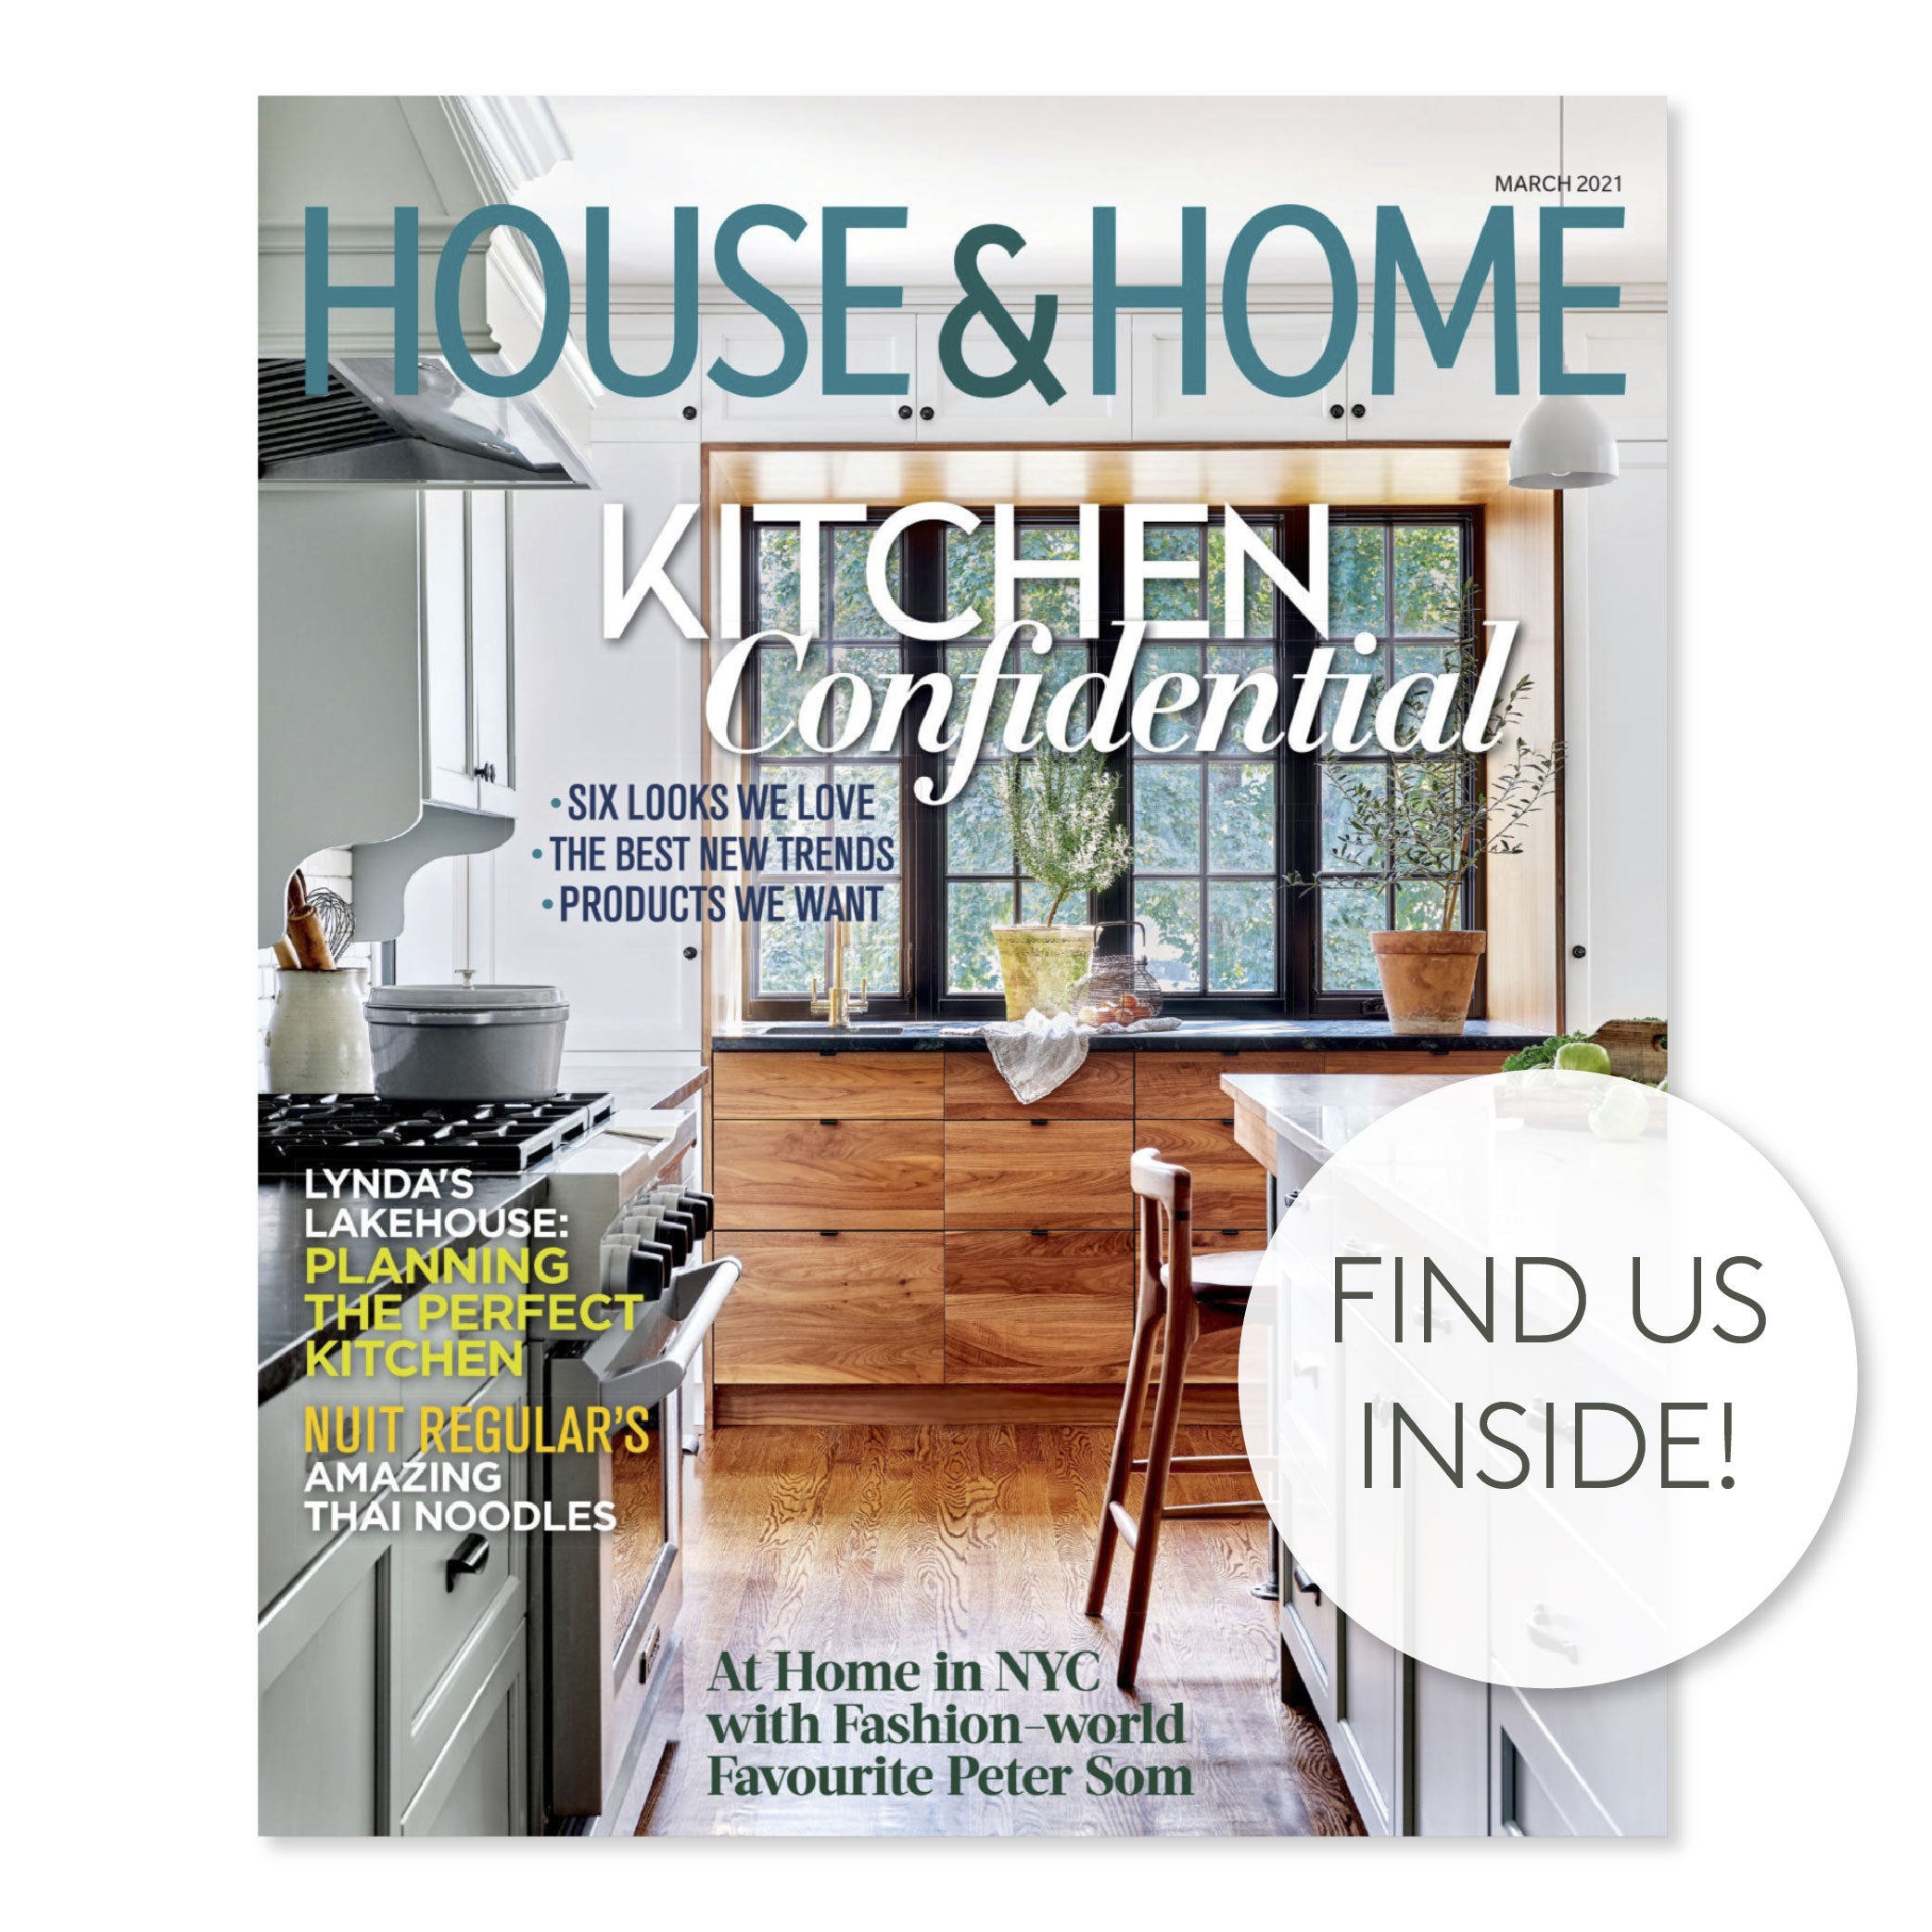 House & Home Magazine, March 2021